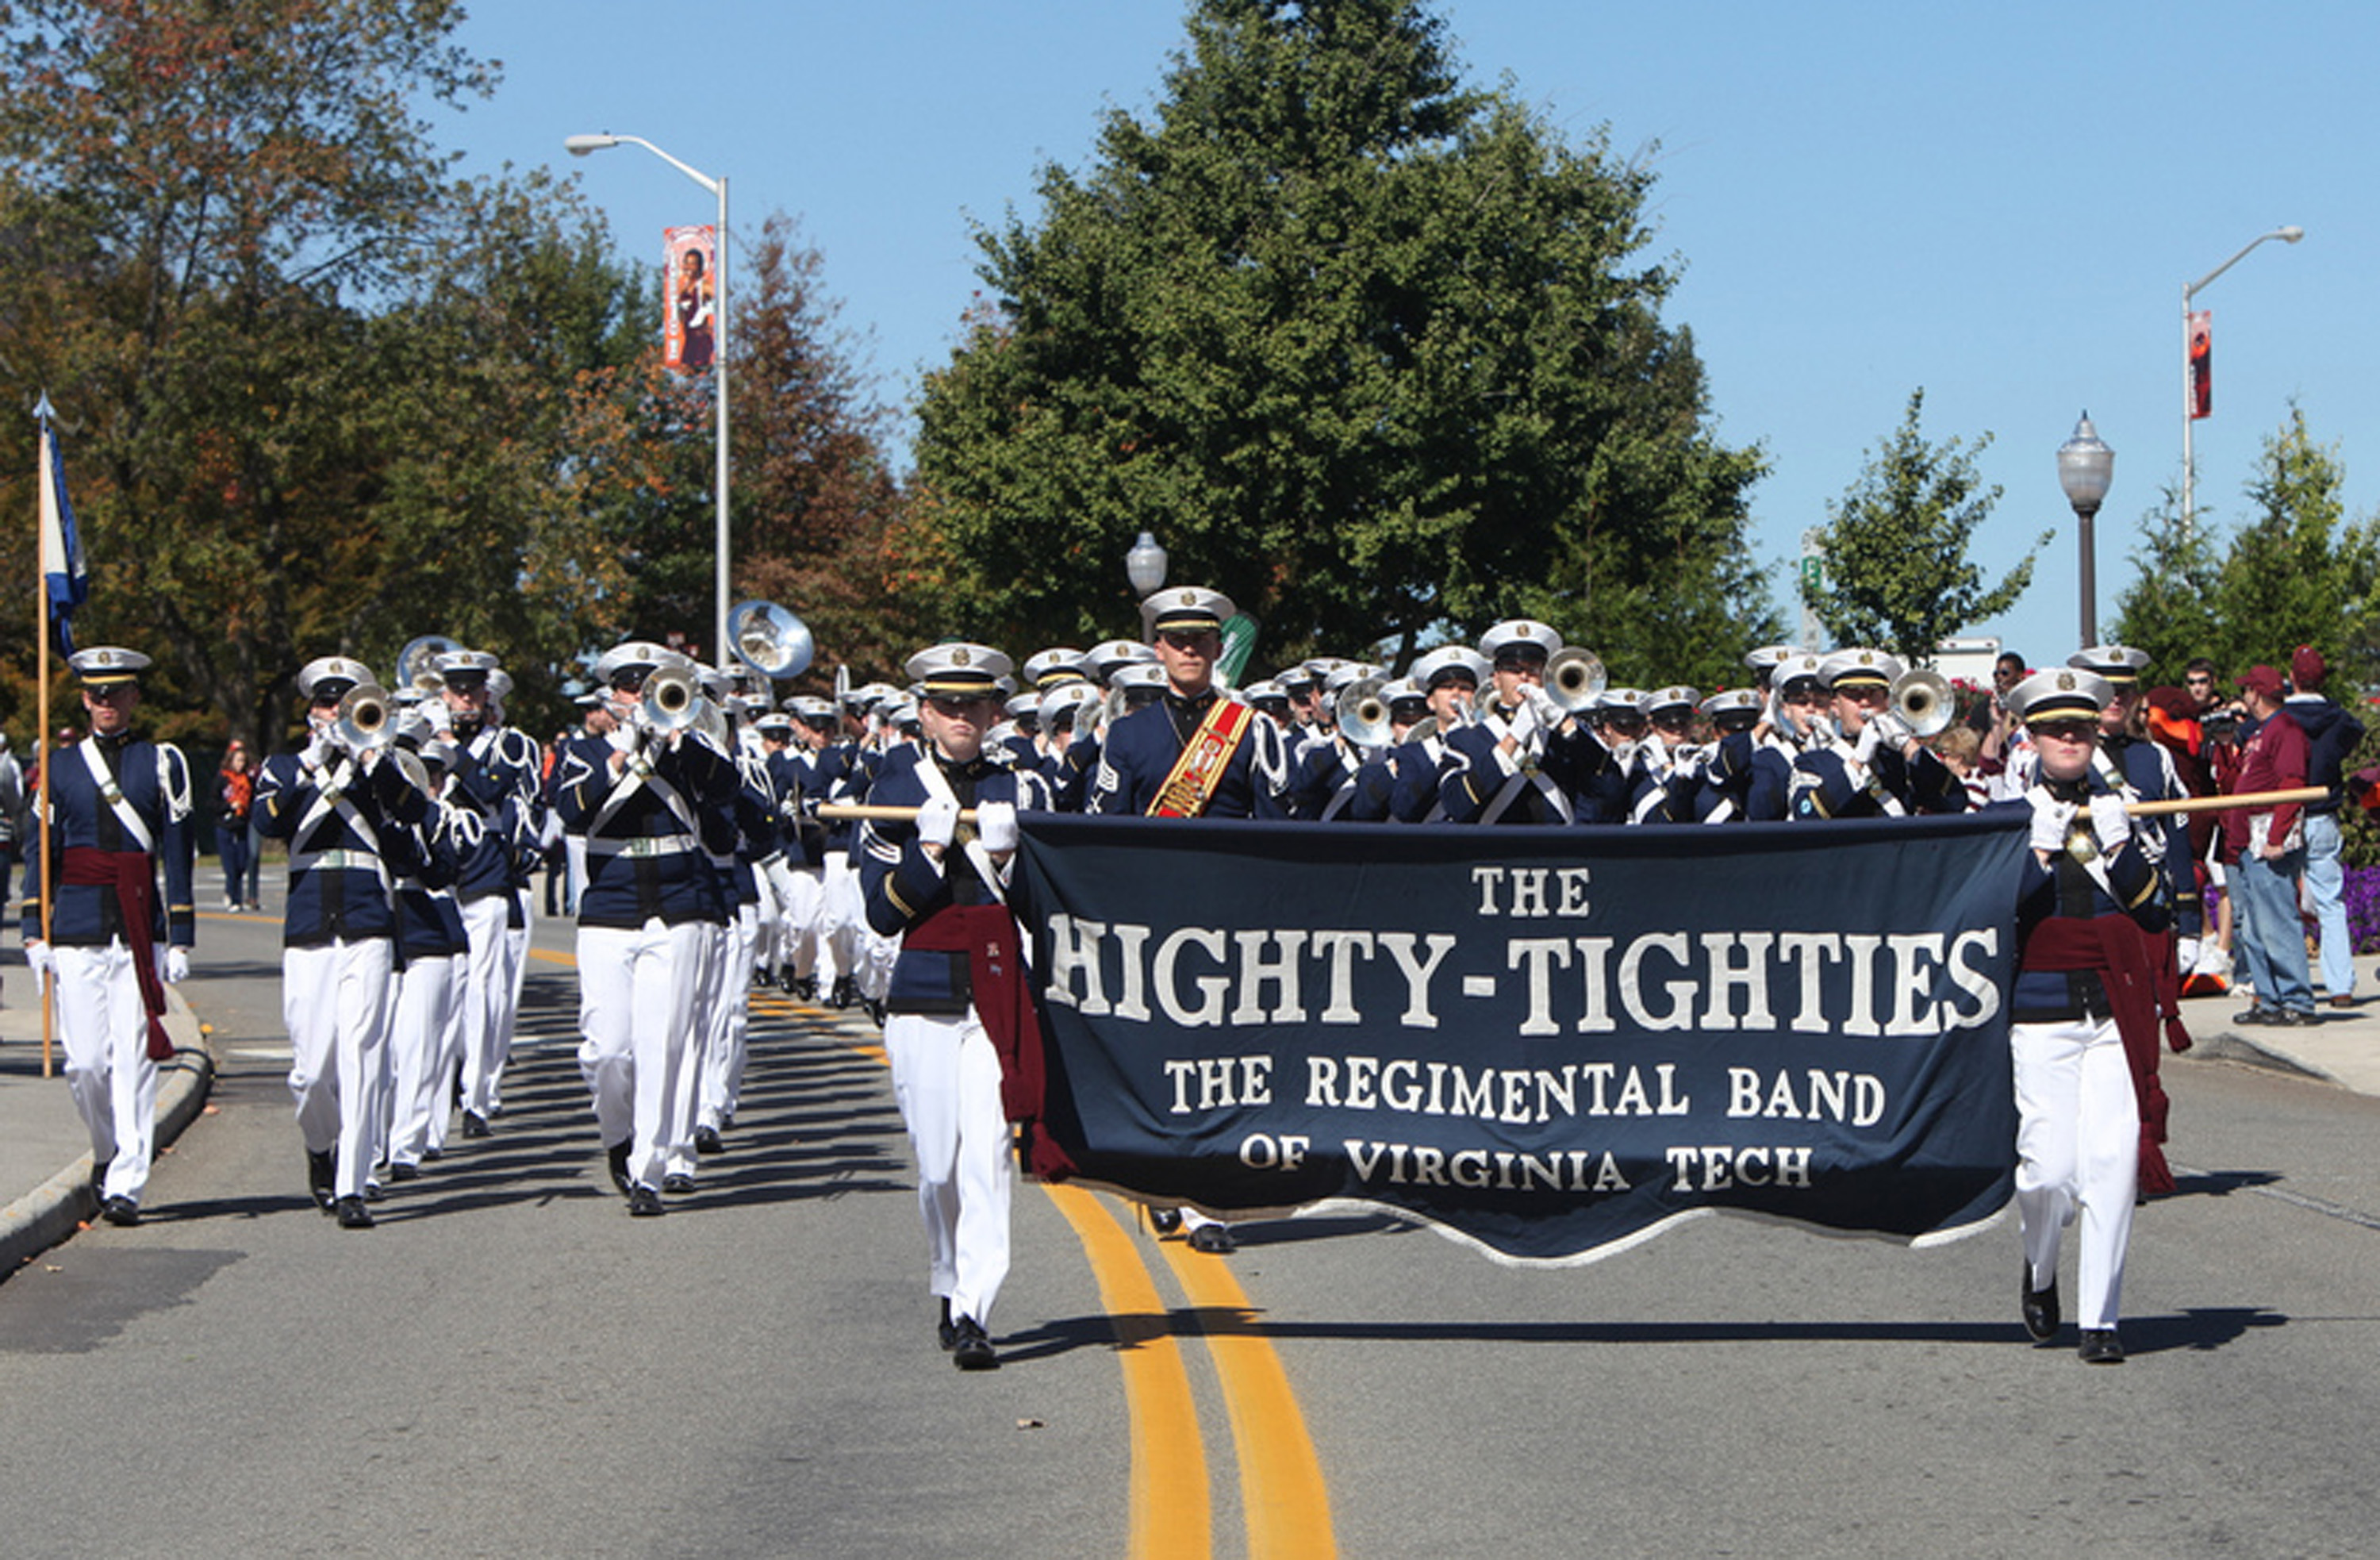 The Virginia Tech Corps of Cadets Regimental Band, the Highty-Tighties march.